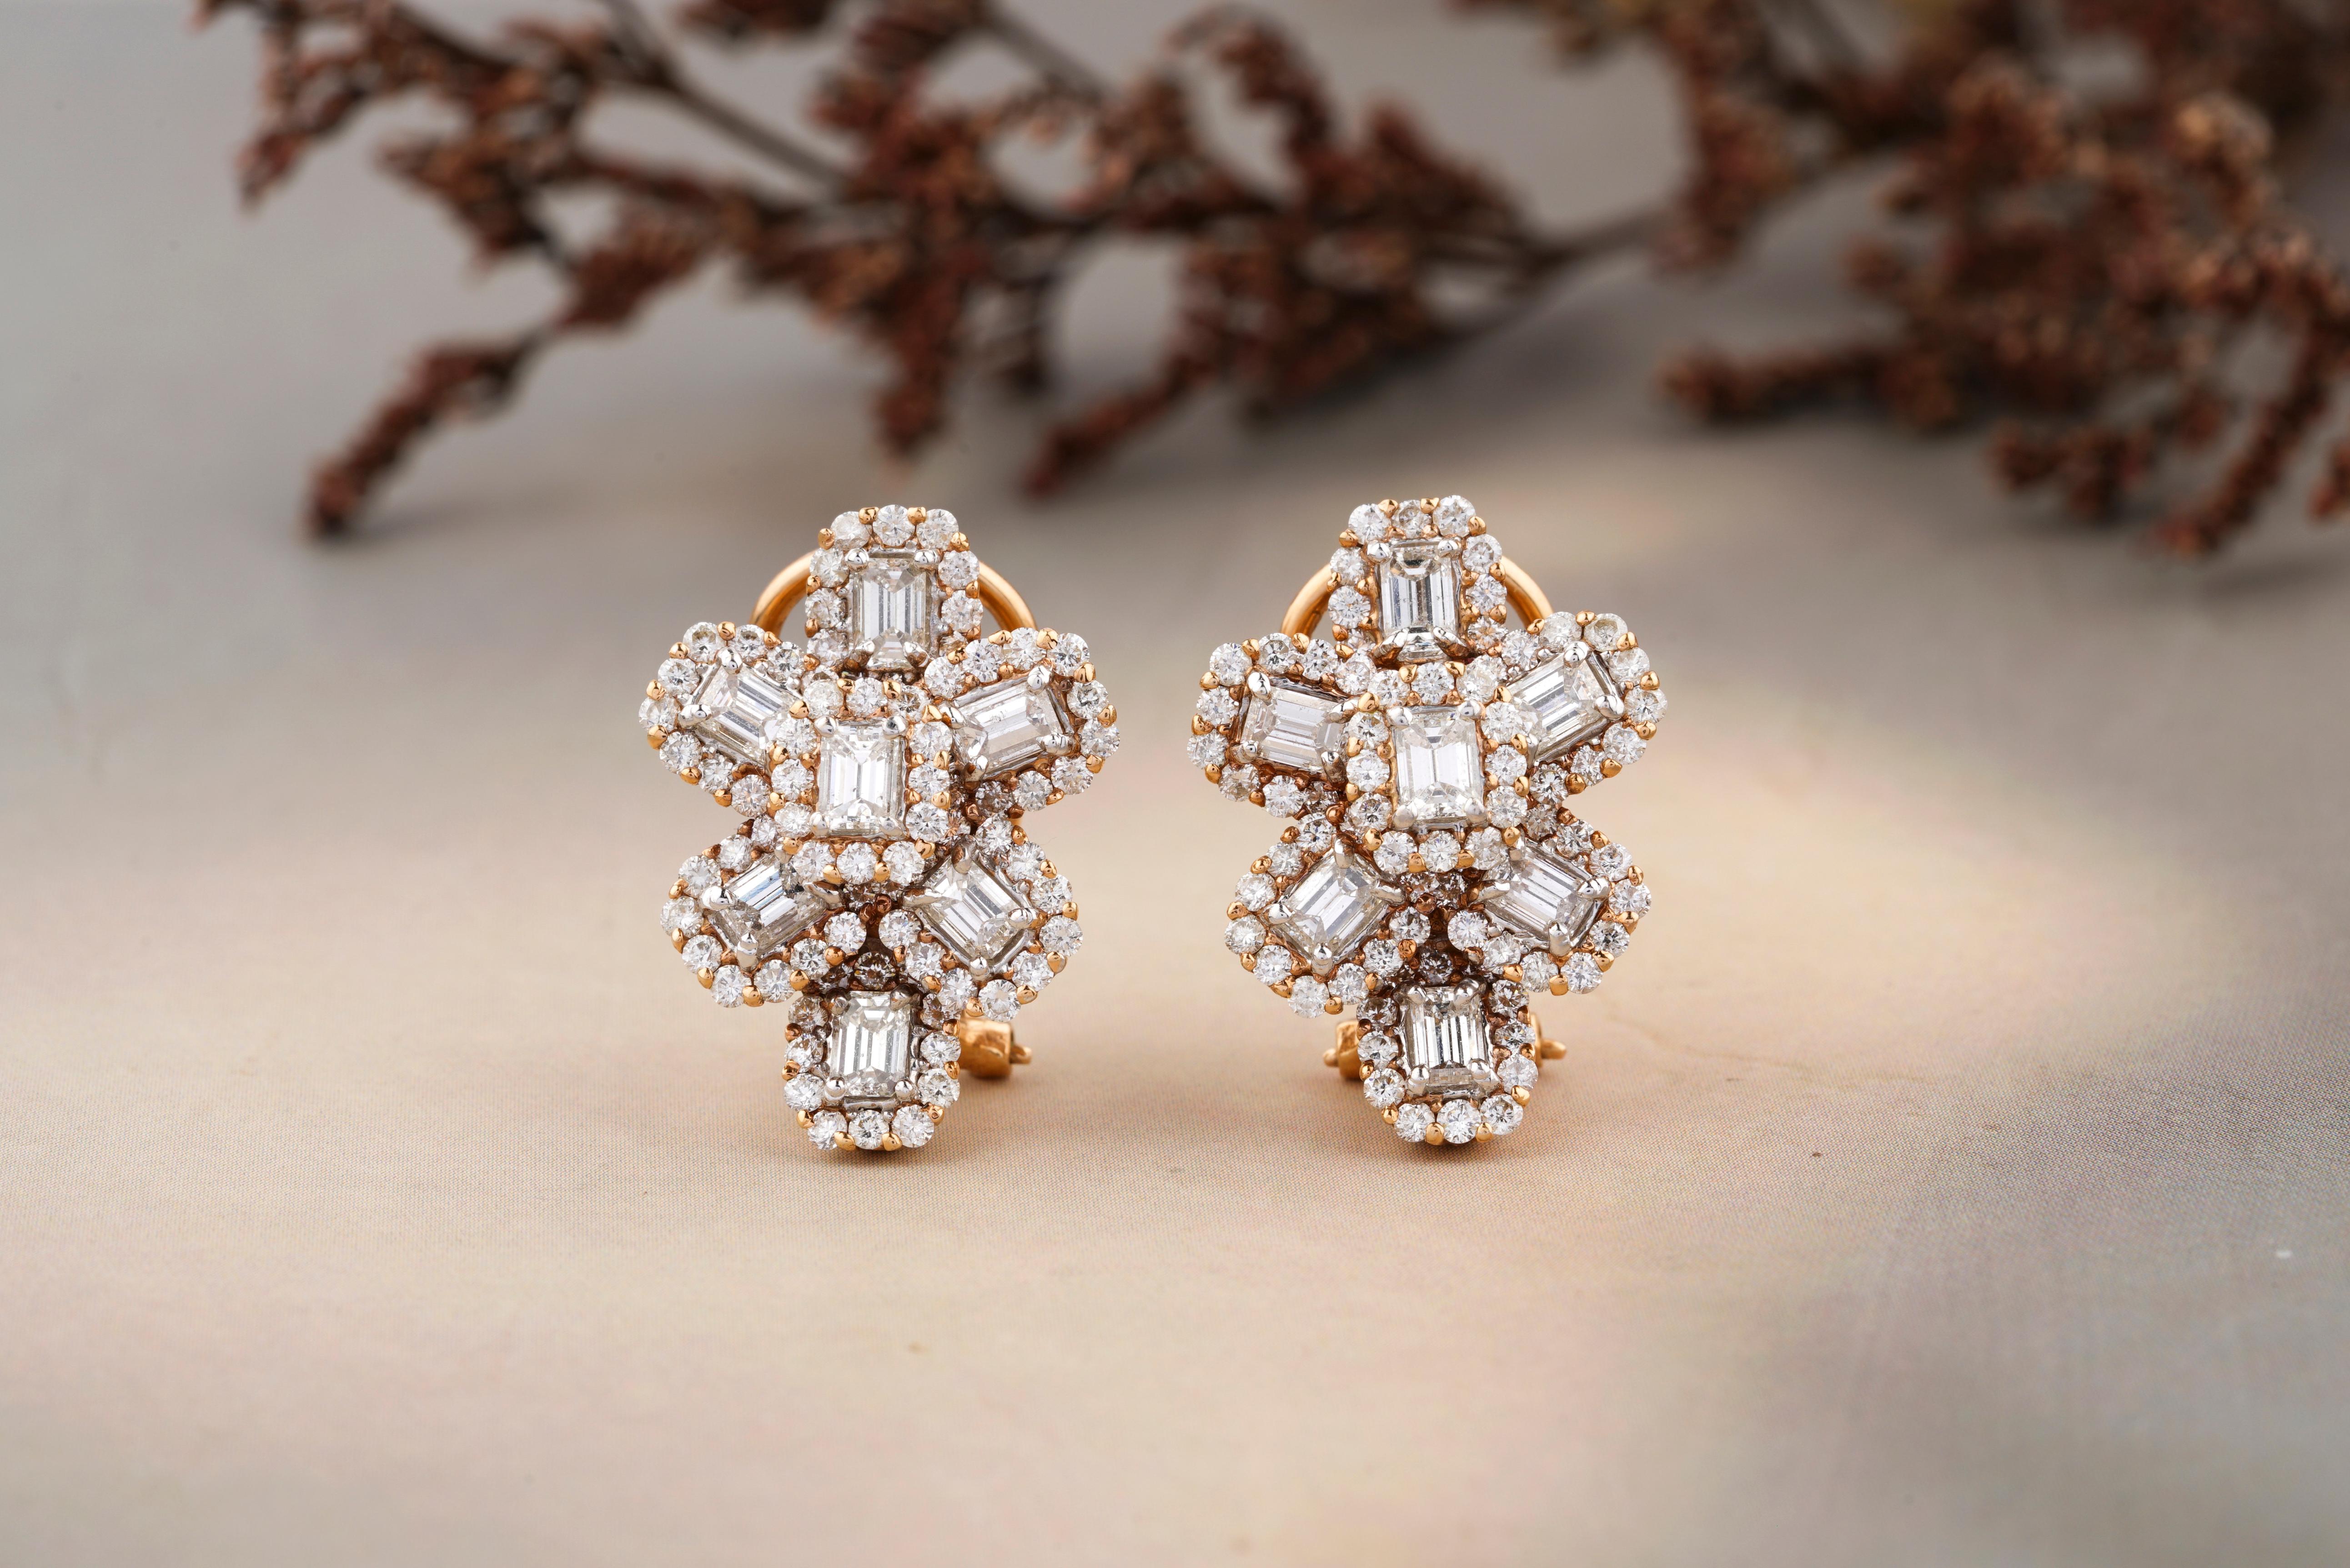 These earrings feature a stunning floral design with a combination of emerald cut and round cut diamonds set in 18k gold. The round cut diamonds create an outline around the center emerald cut diamonds, giving the earrings a unique and eye-catching